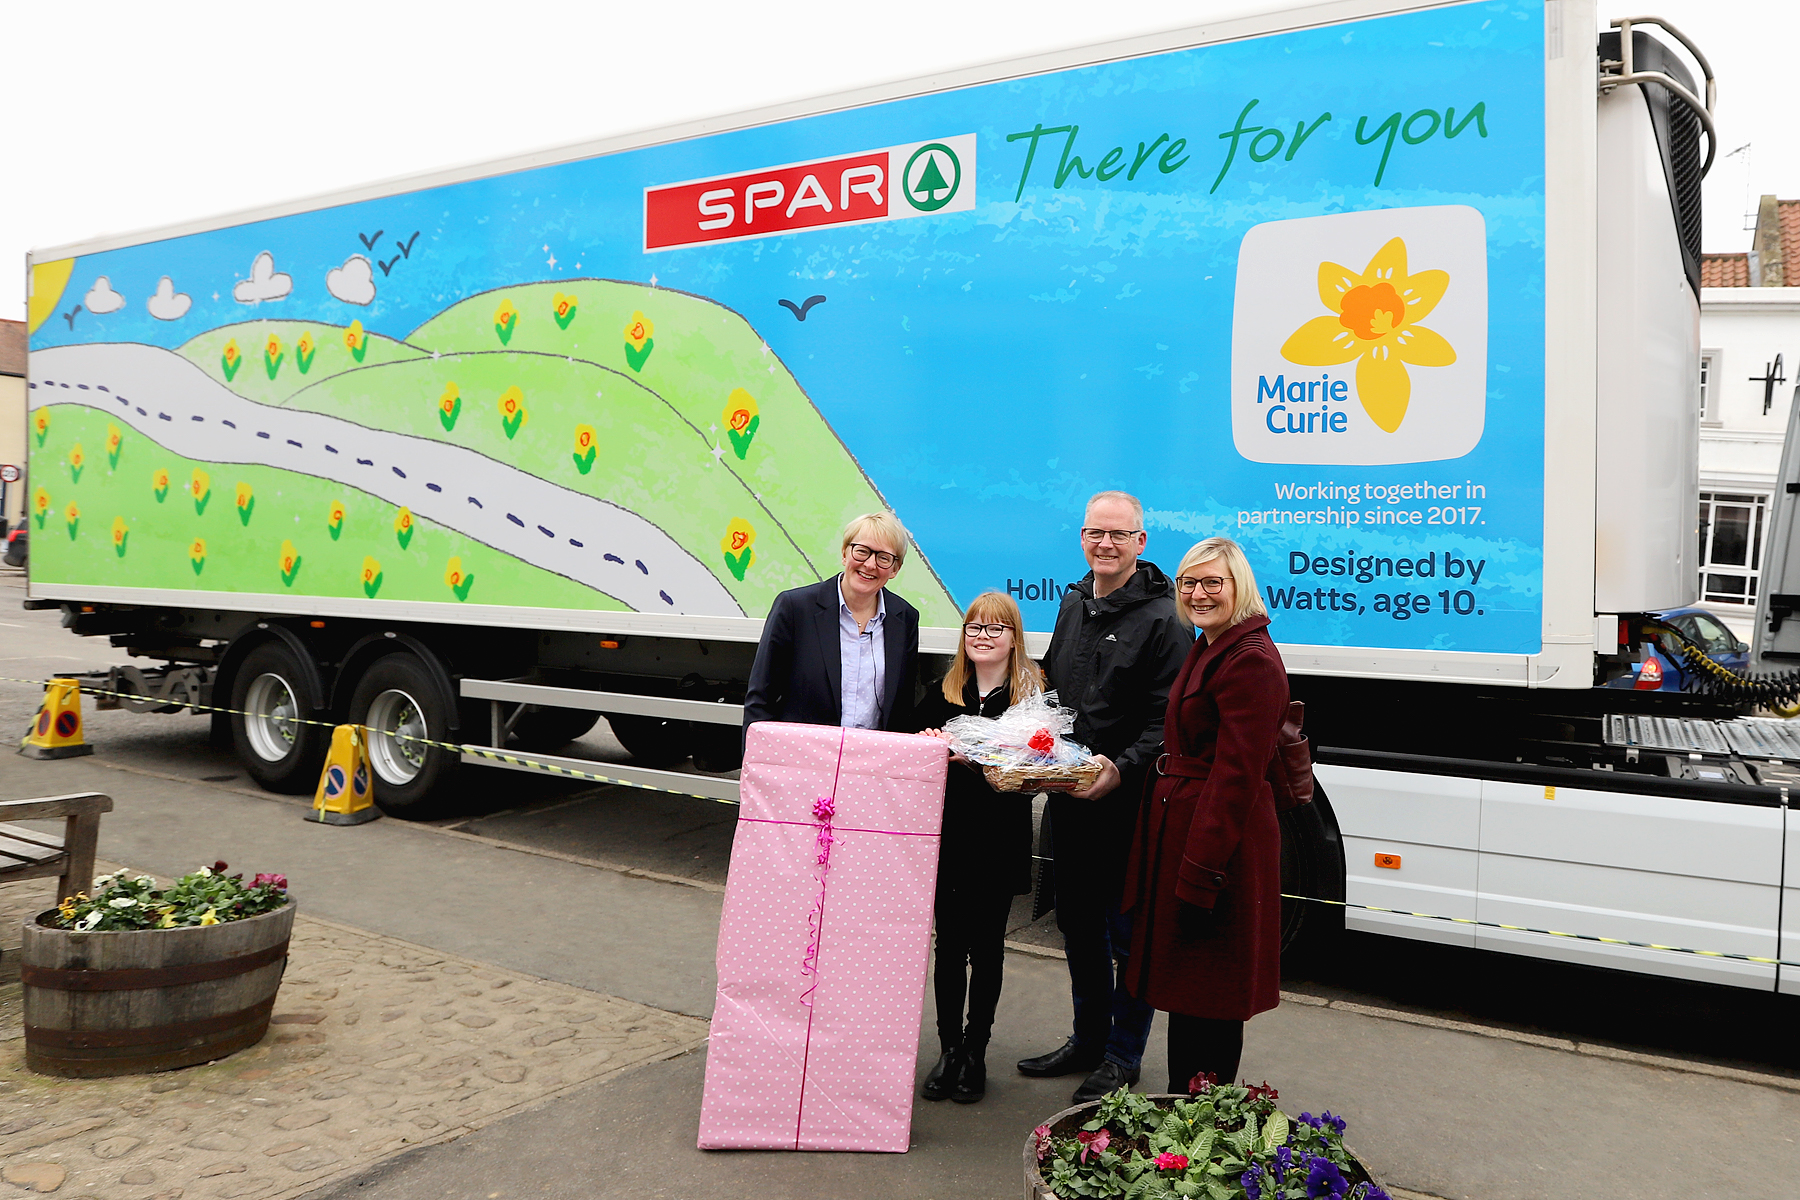 Kirkbymoorside girl wins SPAR and Marie Curie trailer design competition